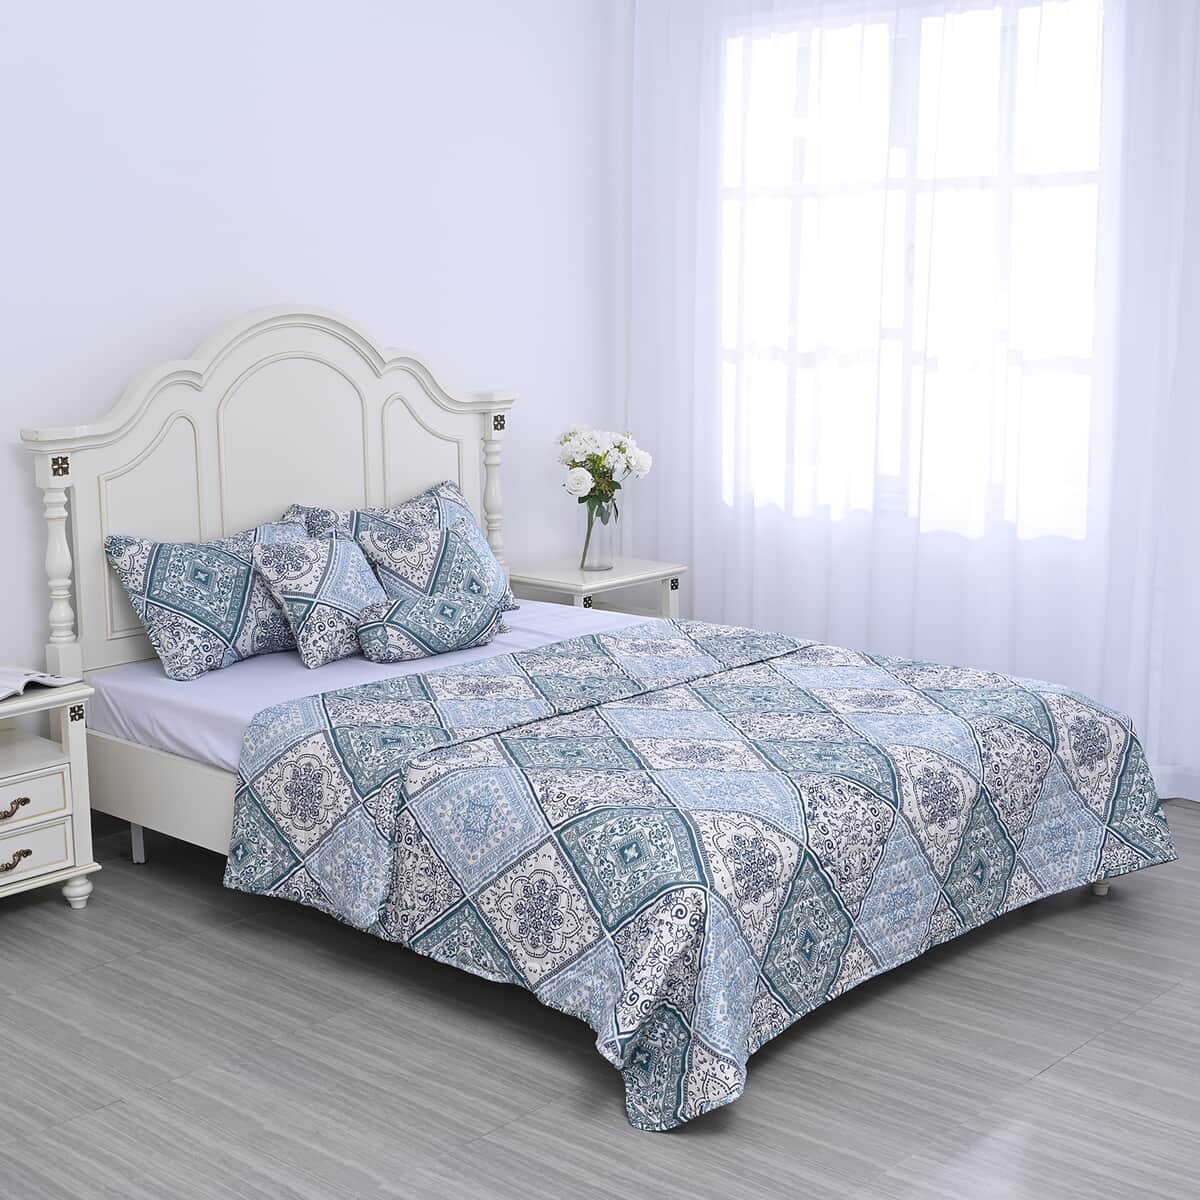 Homesmart Blue and Green Flower Printed 6pcs Quilt Set - Queen (100% Microfiber) image number 0